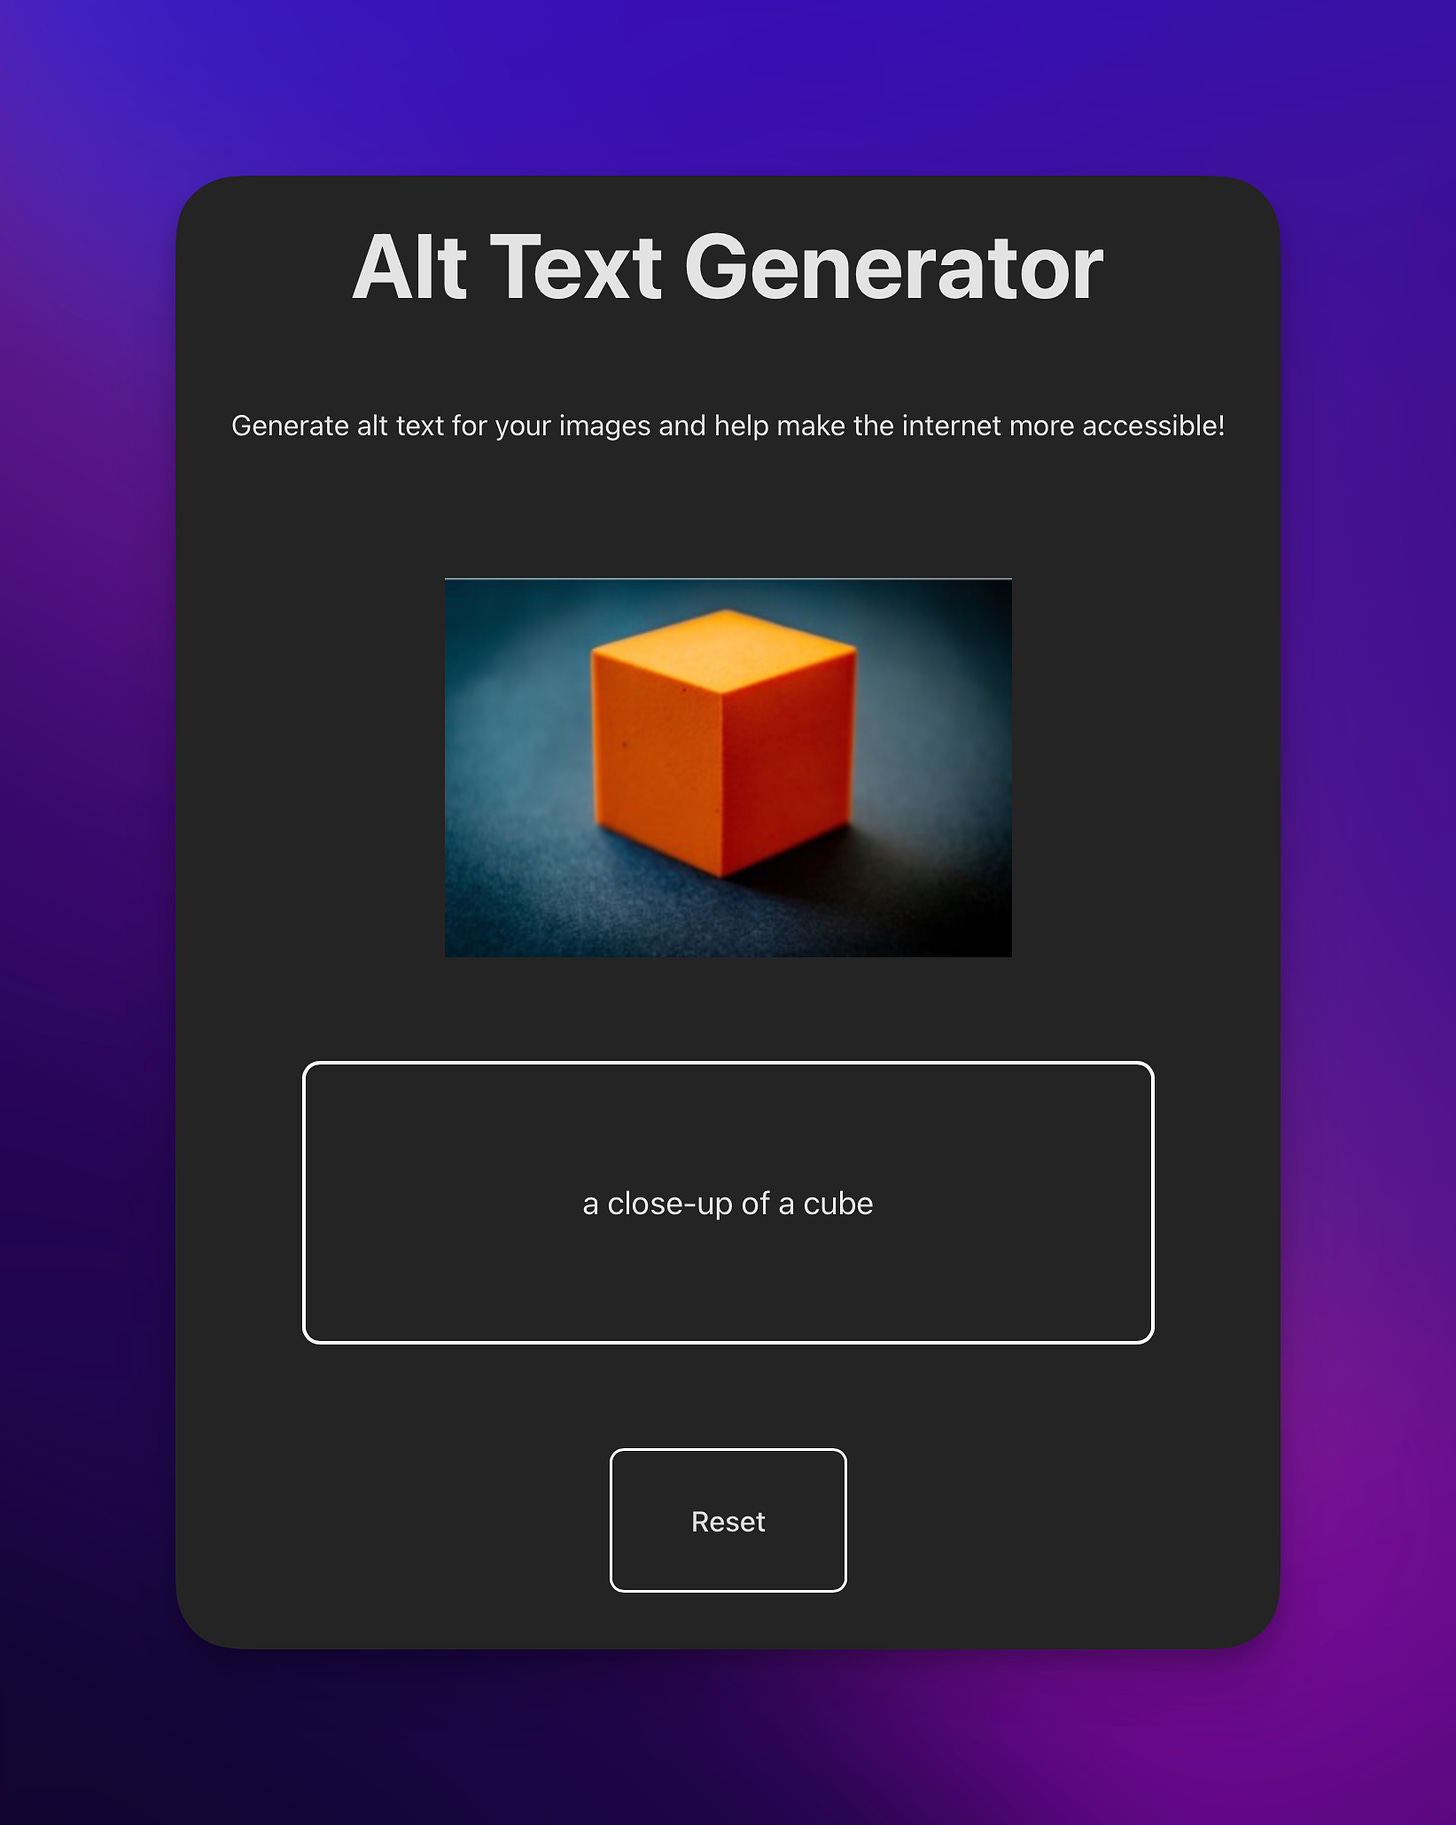 An alt text generator creating alt tex for an image of a cube